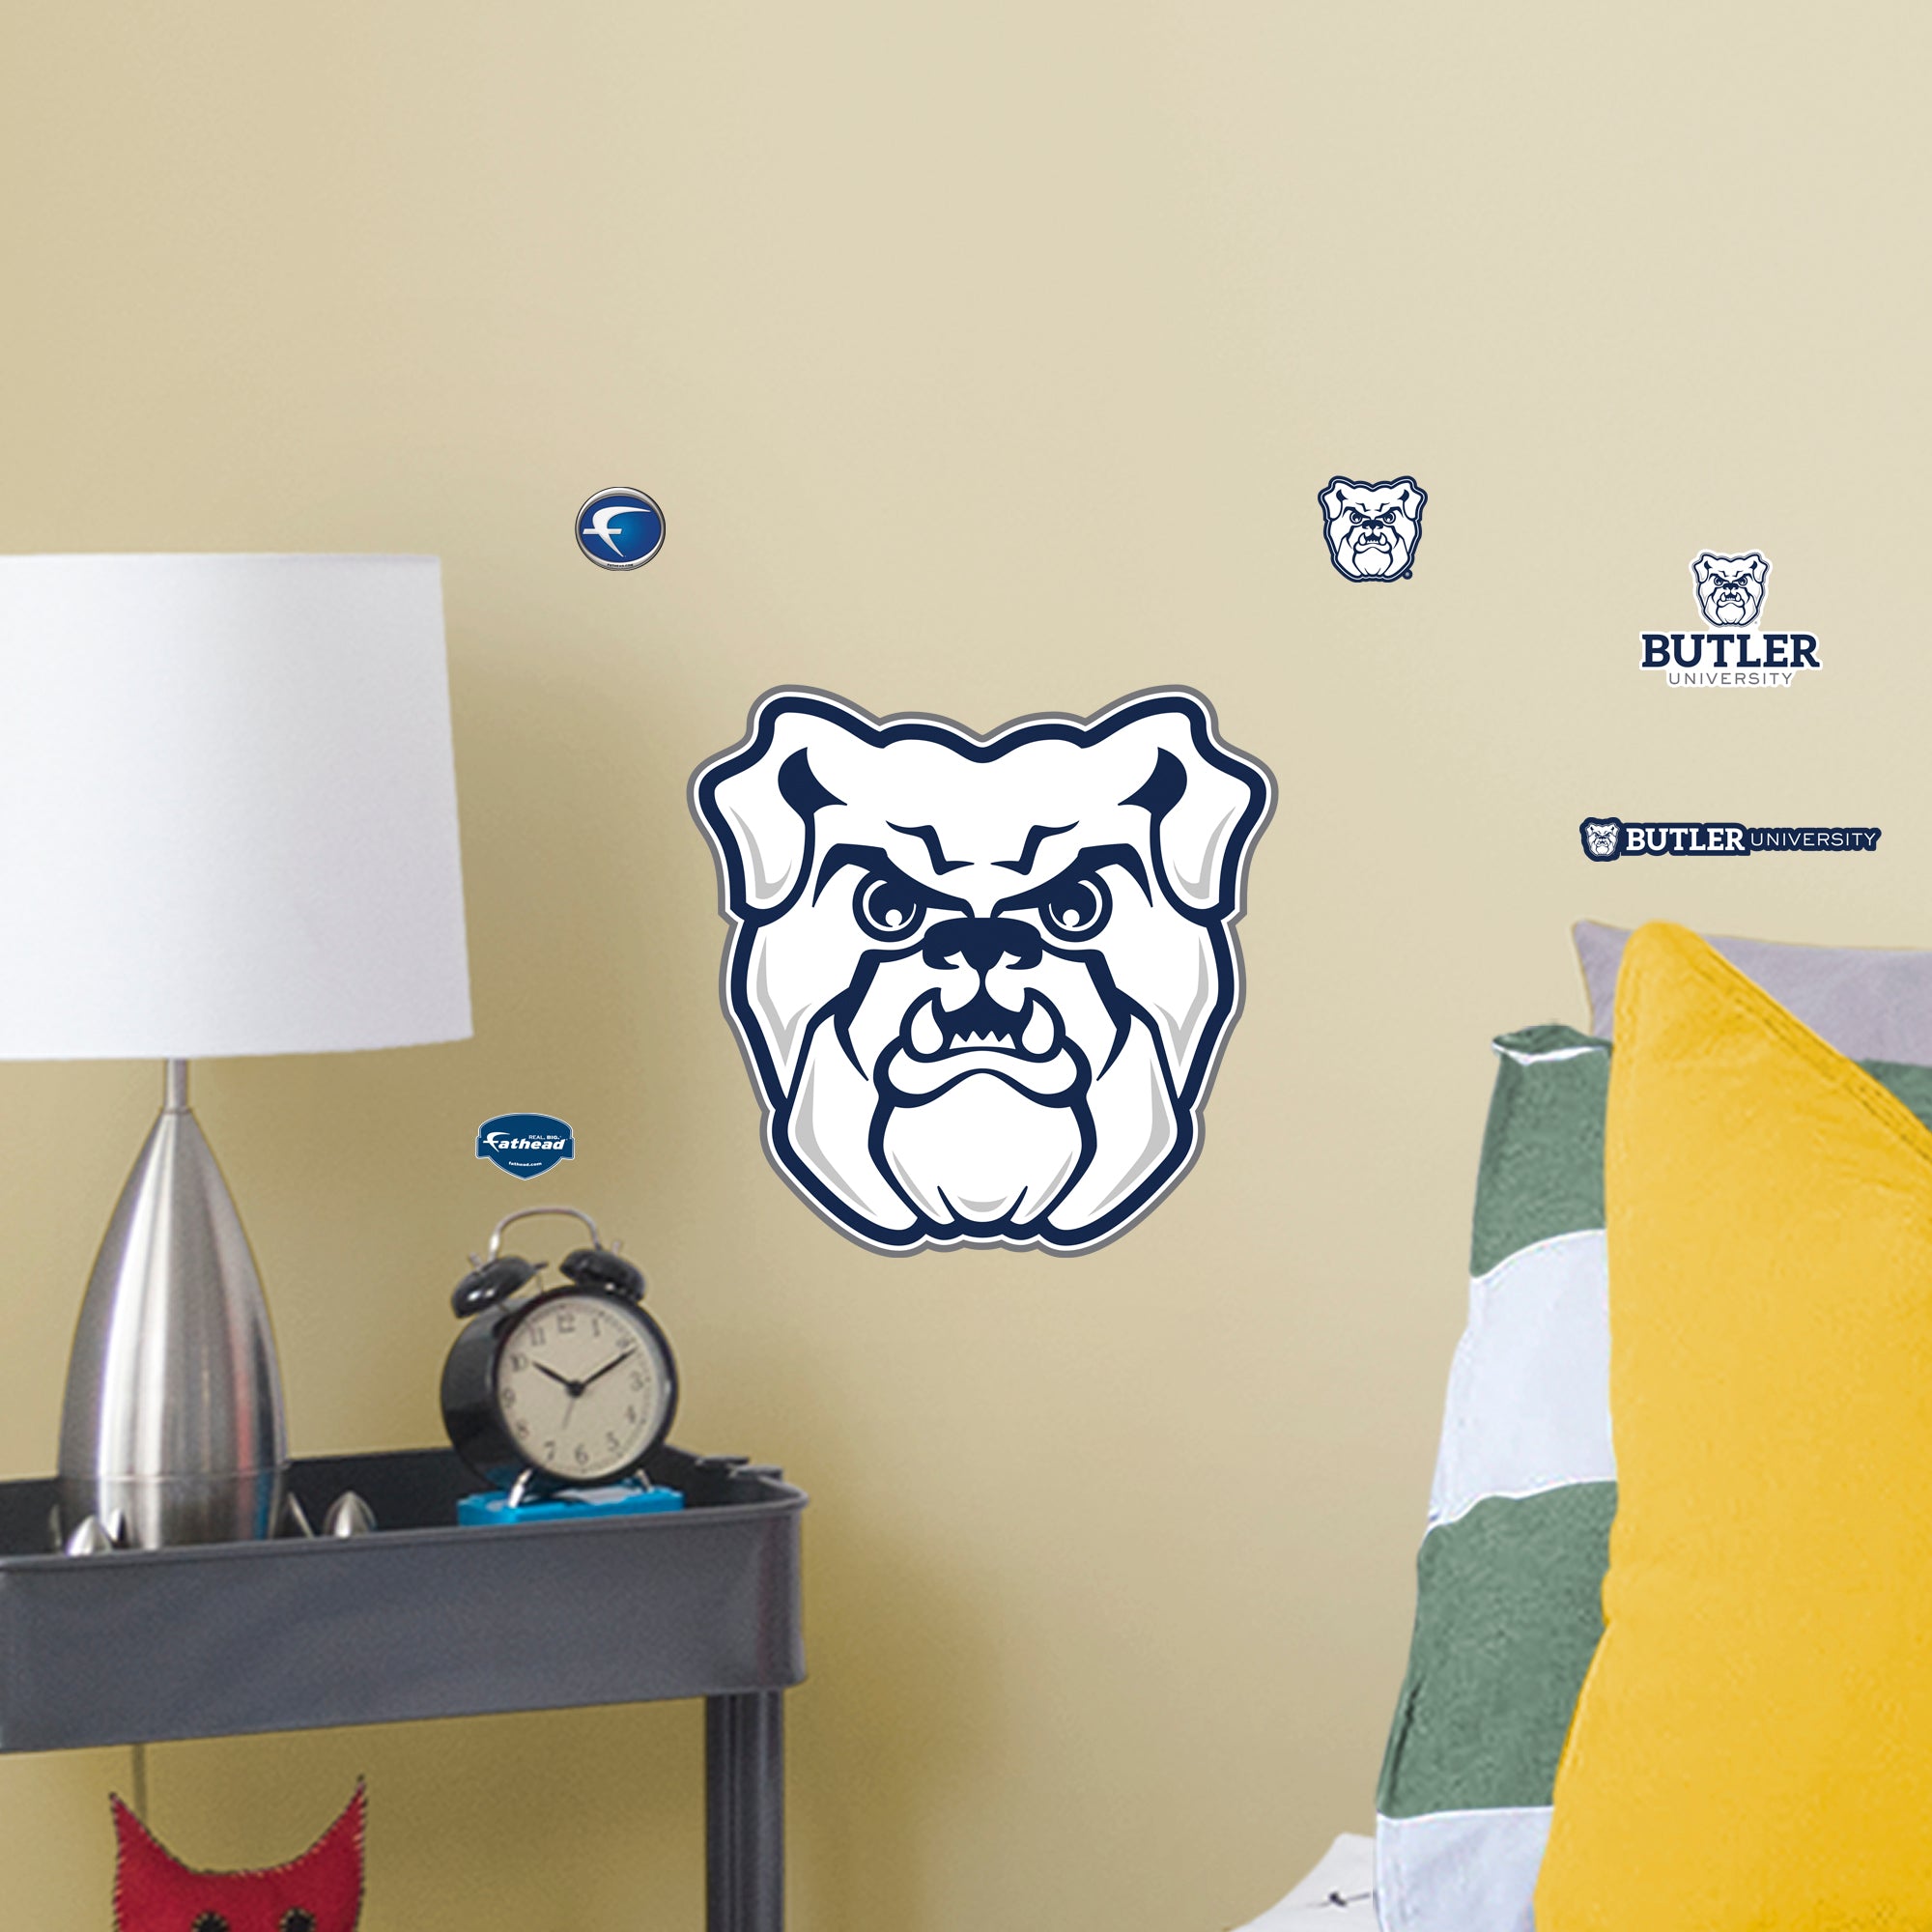 Butler Bulldogs 2020 POD Teammate Logo - Officially Licensed NCAA Removable Wall Decal Large by Fathead | Vinyl